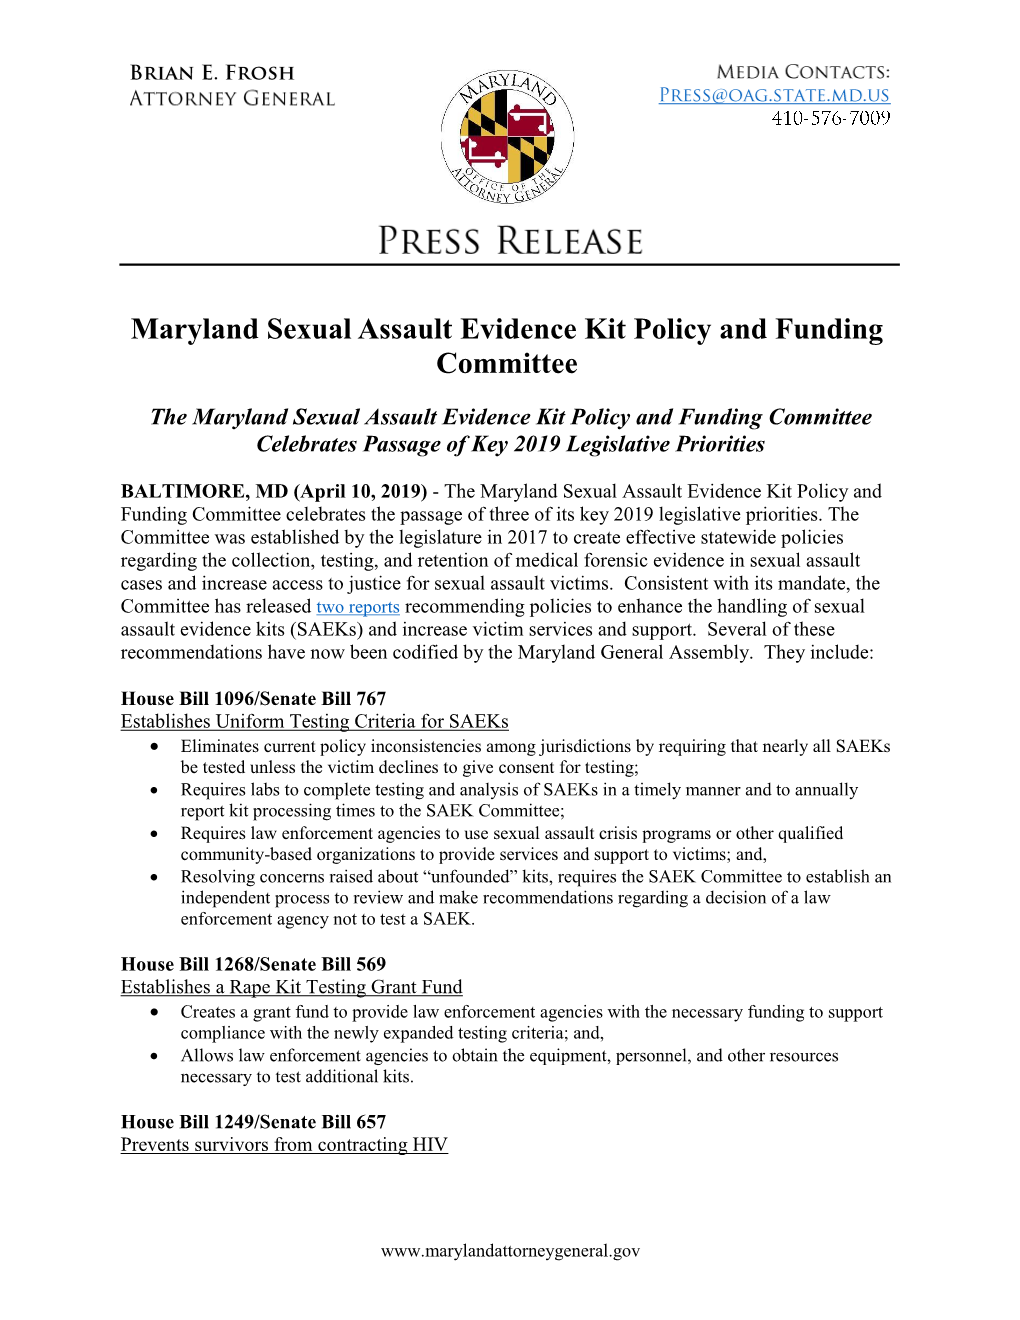 Maryland Sexual Assault Evidence Kit Policy and Funding Committee